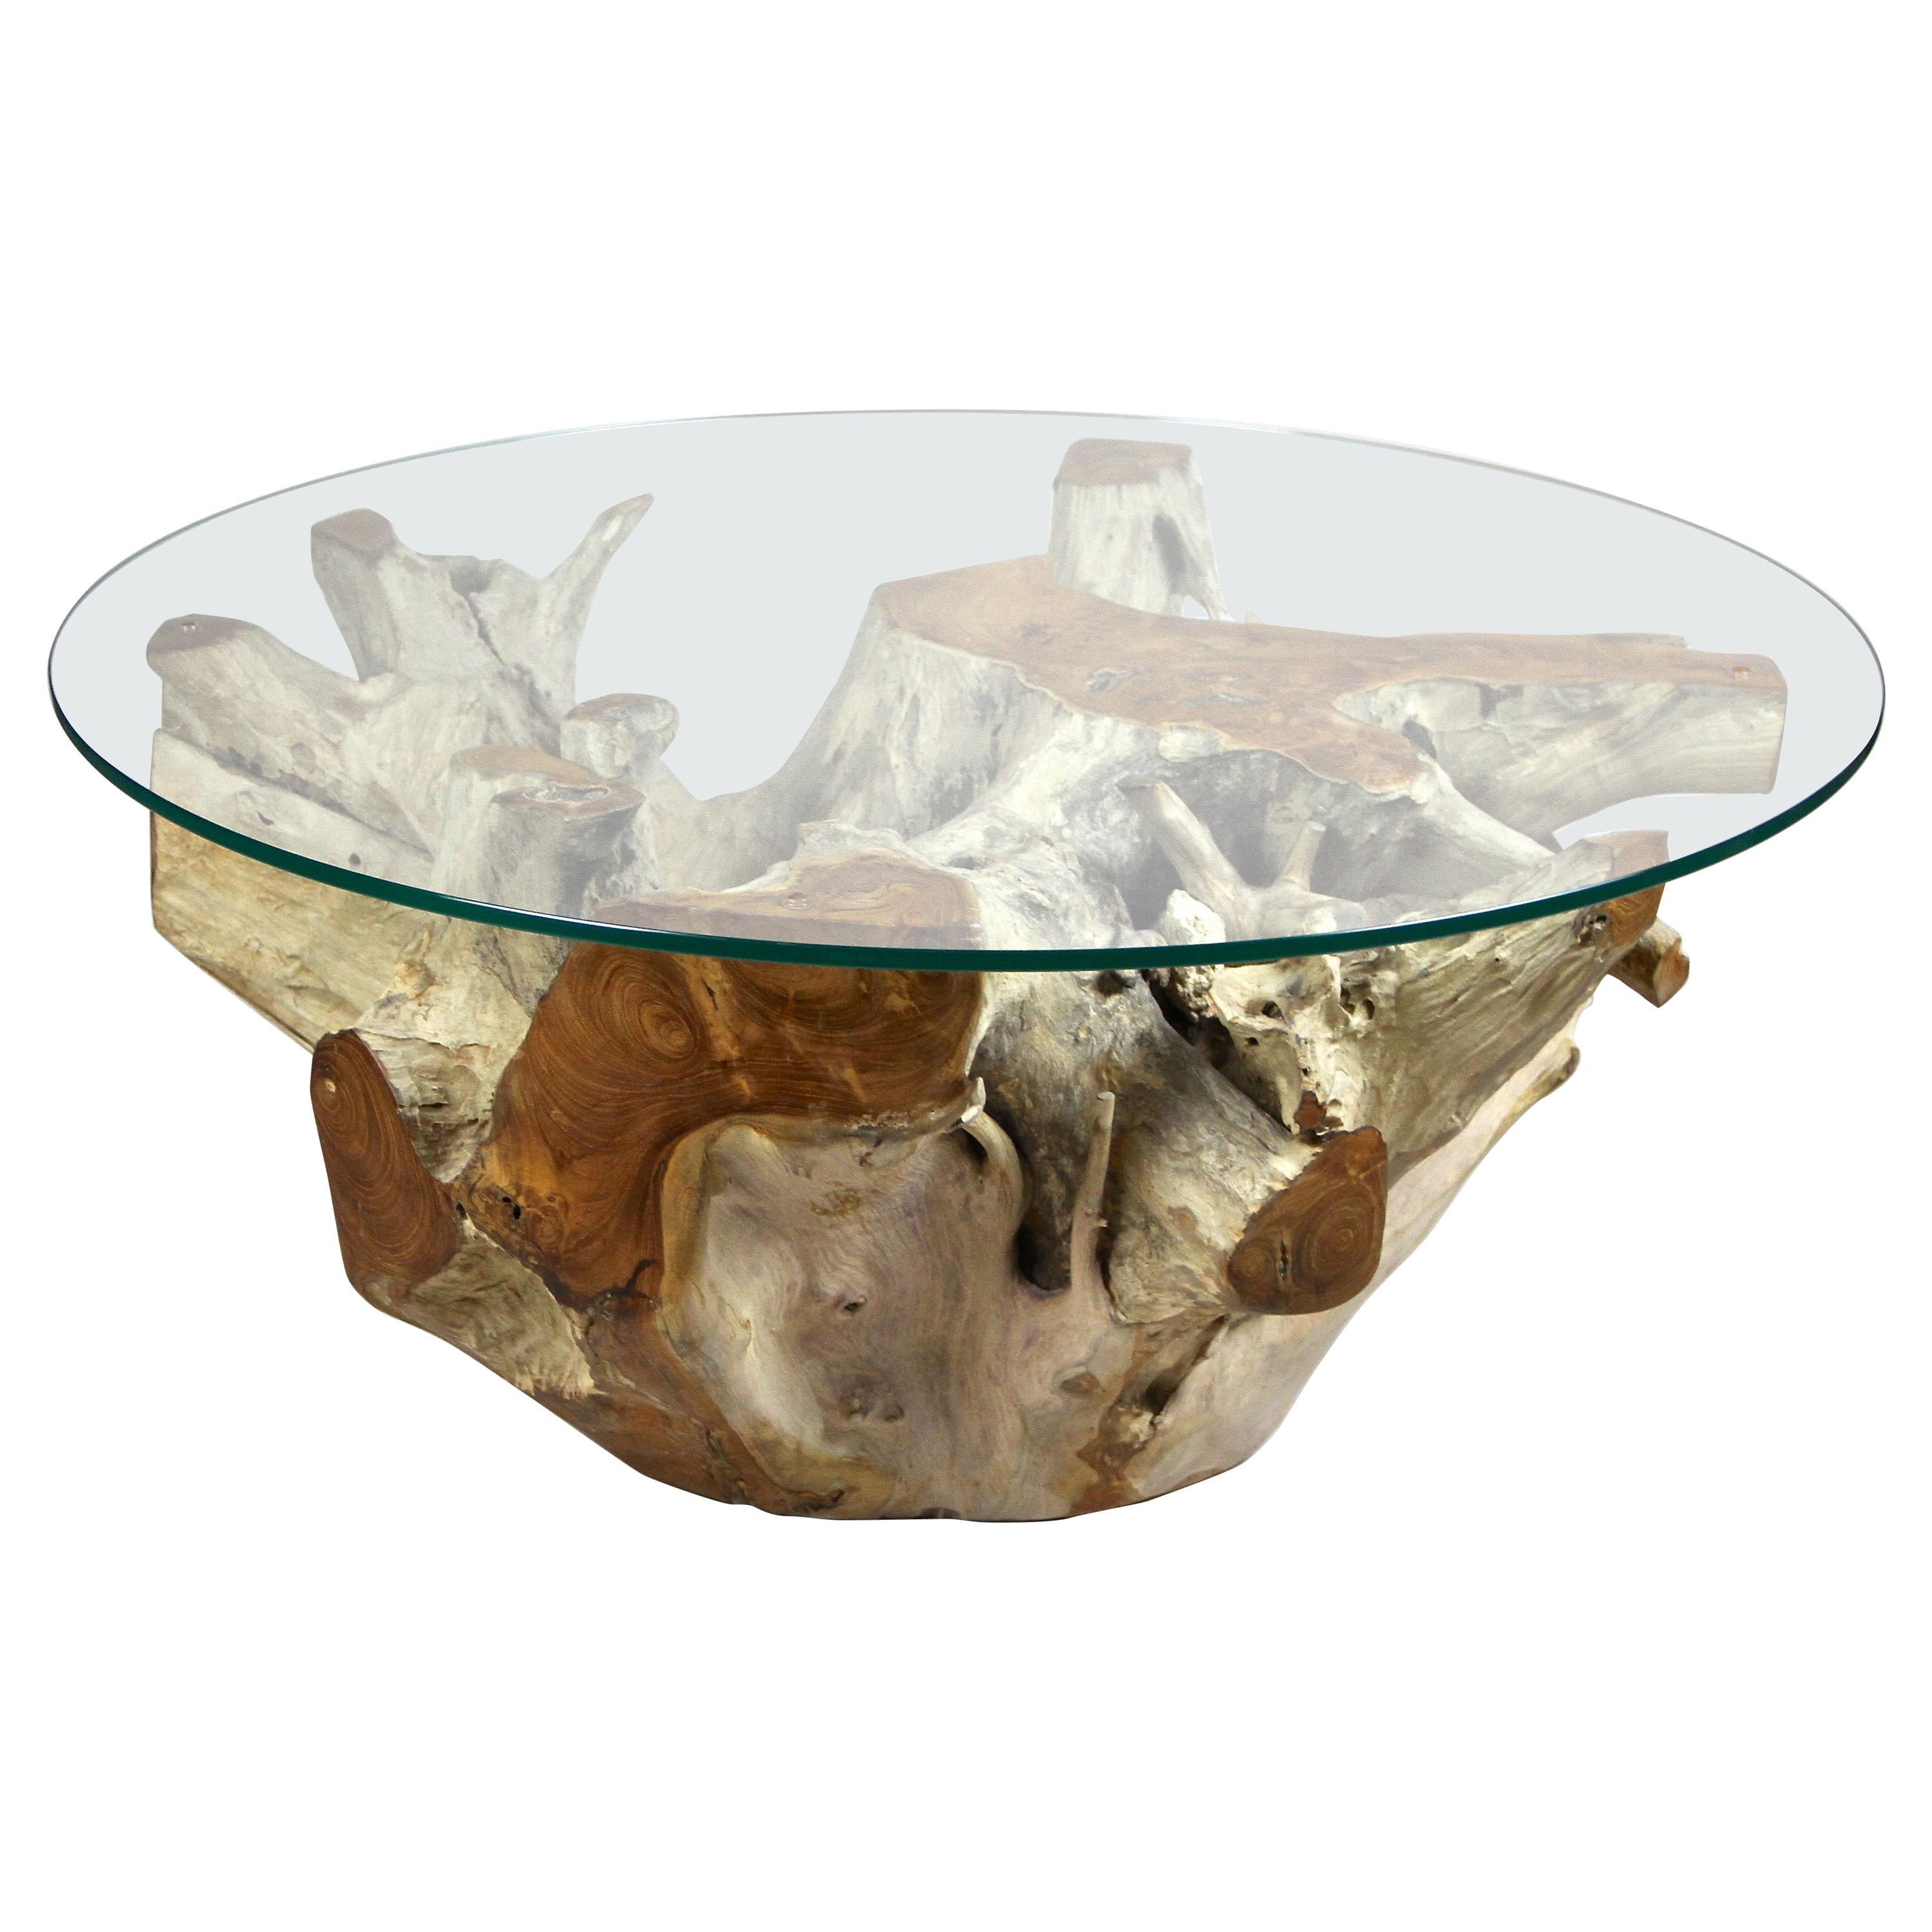 Round Organic Teak Root Coffee Table with Safety Glass Plate, 2021